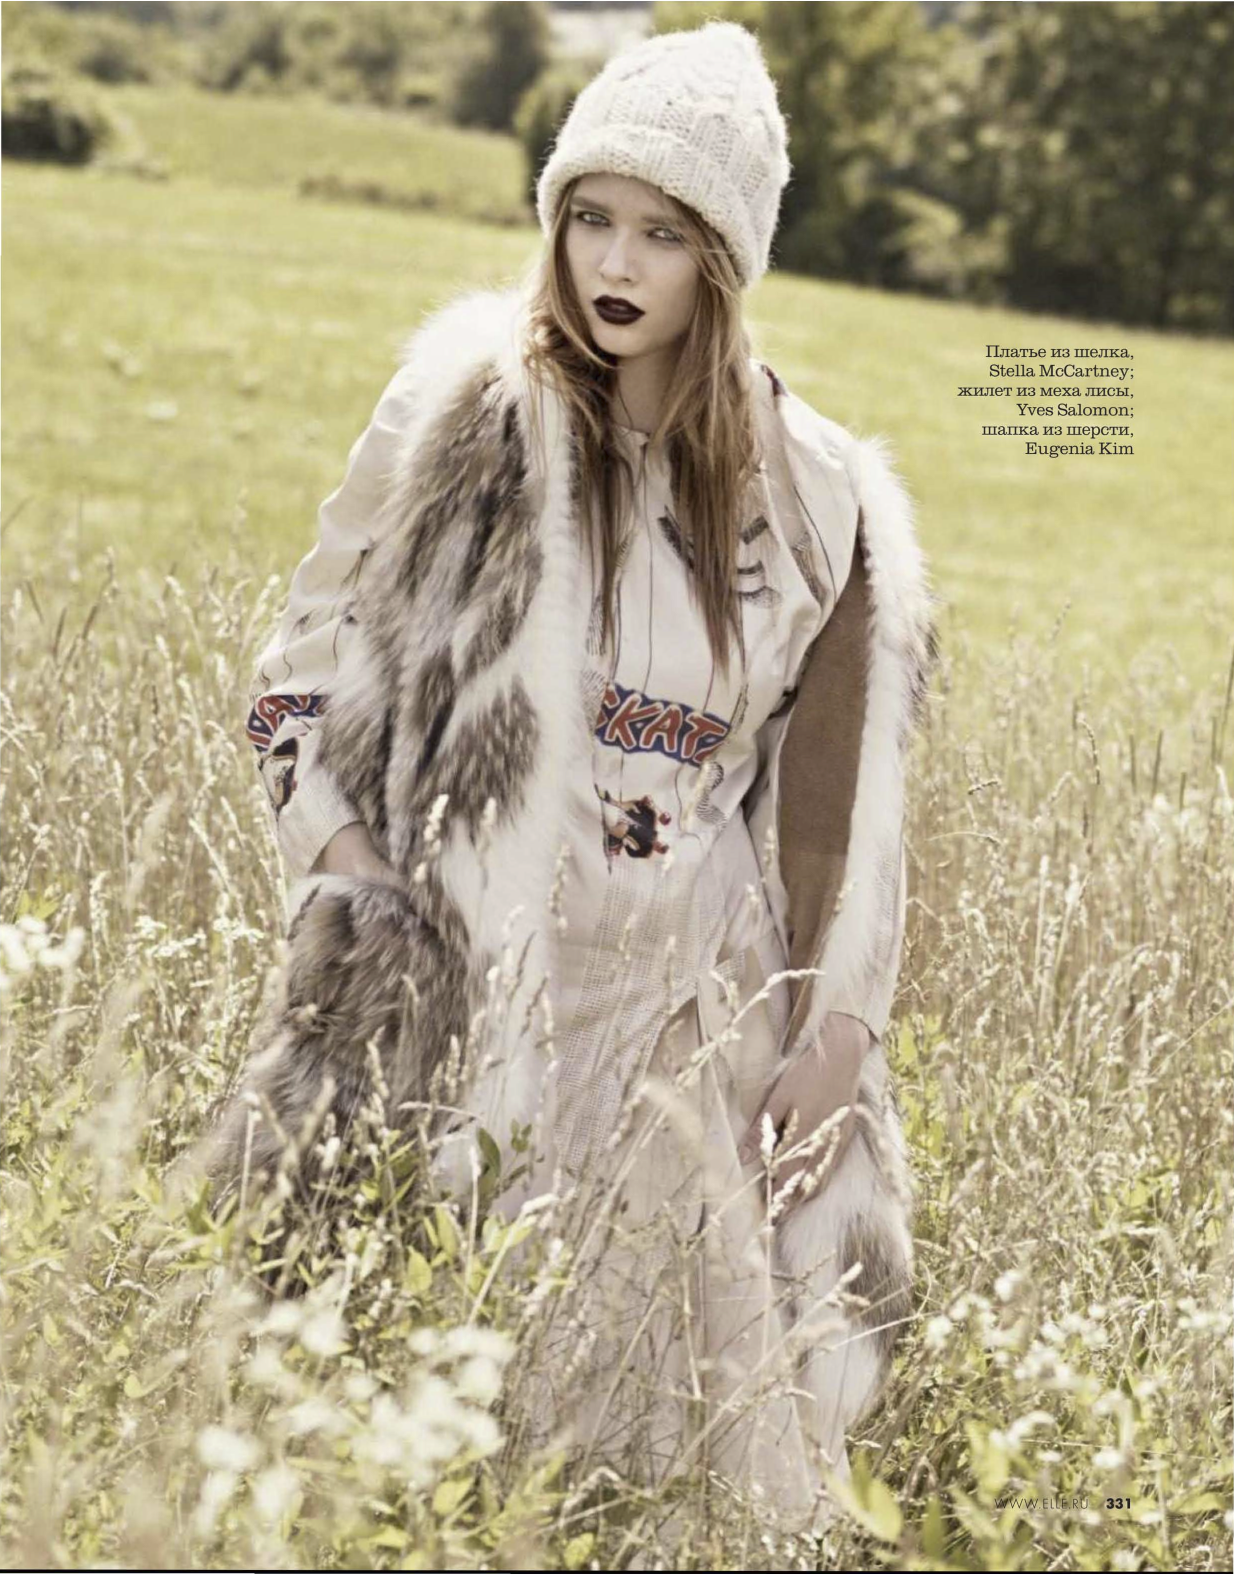 beegee margenyte and nicola wincenc by kt auleta for elle russia ...